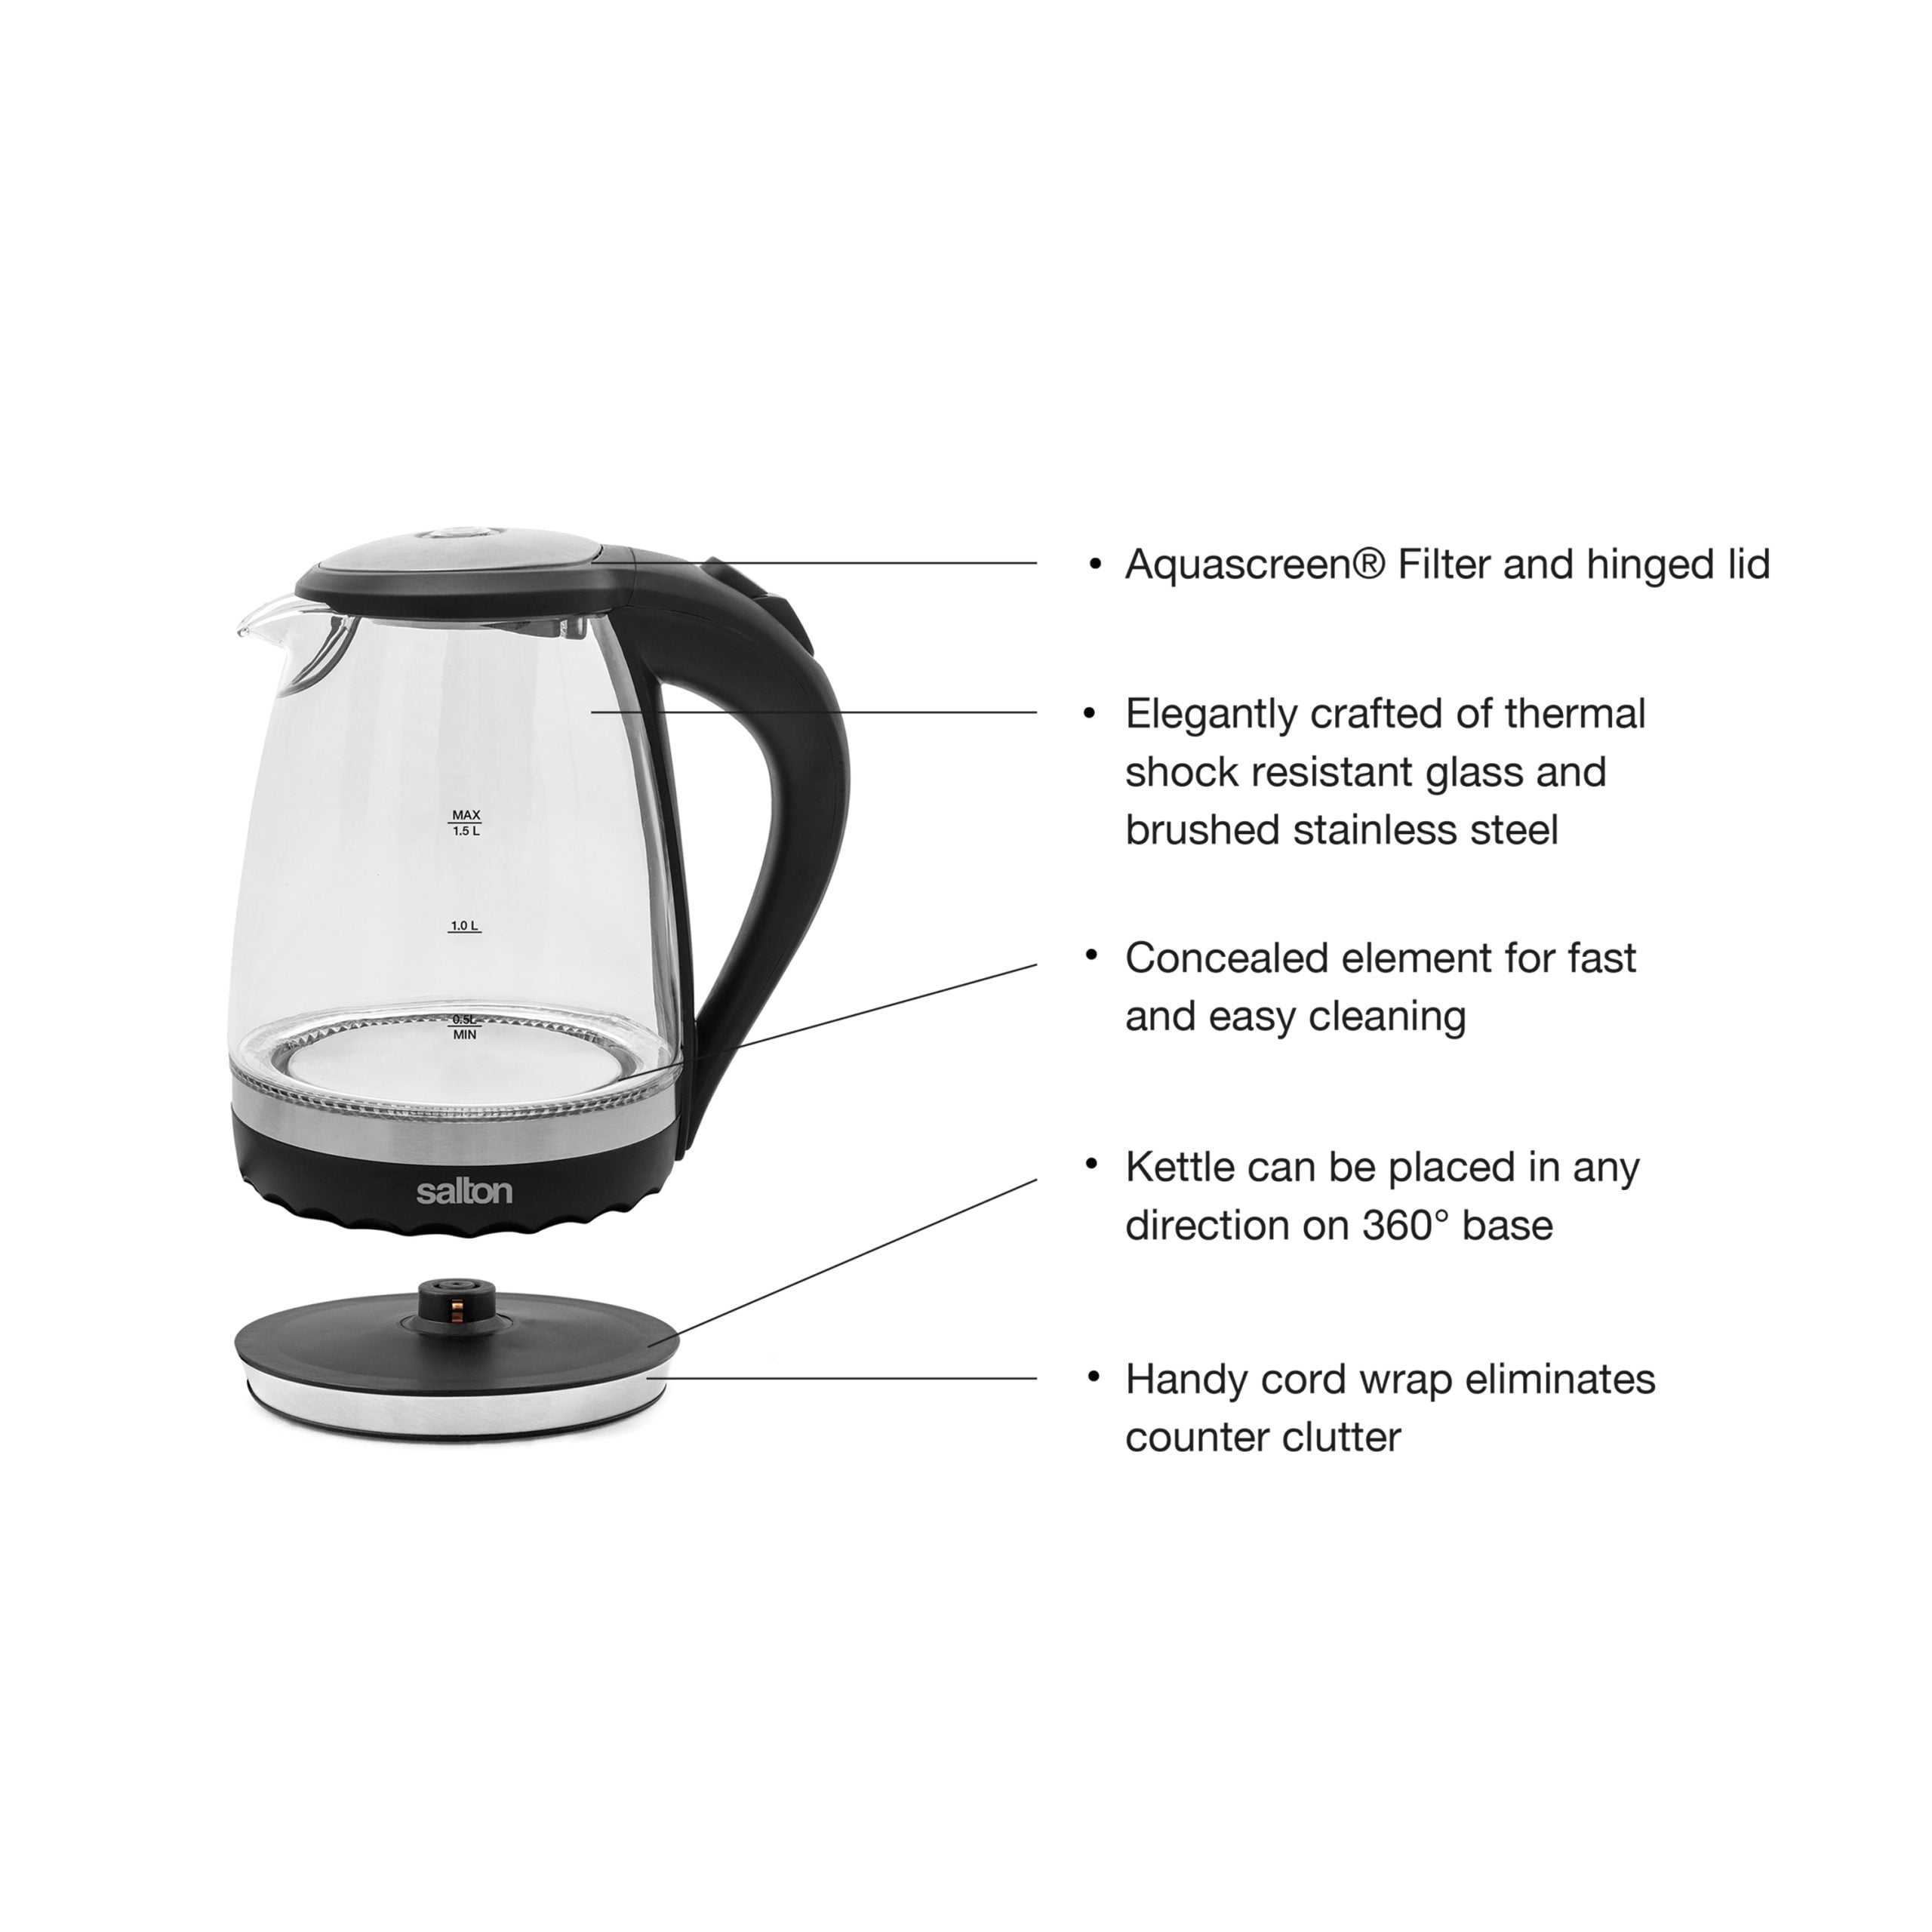 Salton 1.7 Qt. Glass Electric Tea Kettle with Infuser - Yahoo Shopping